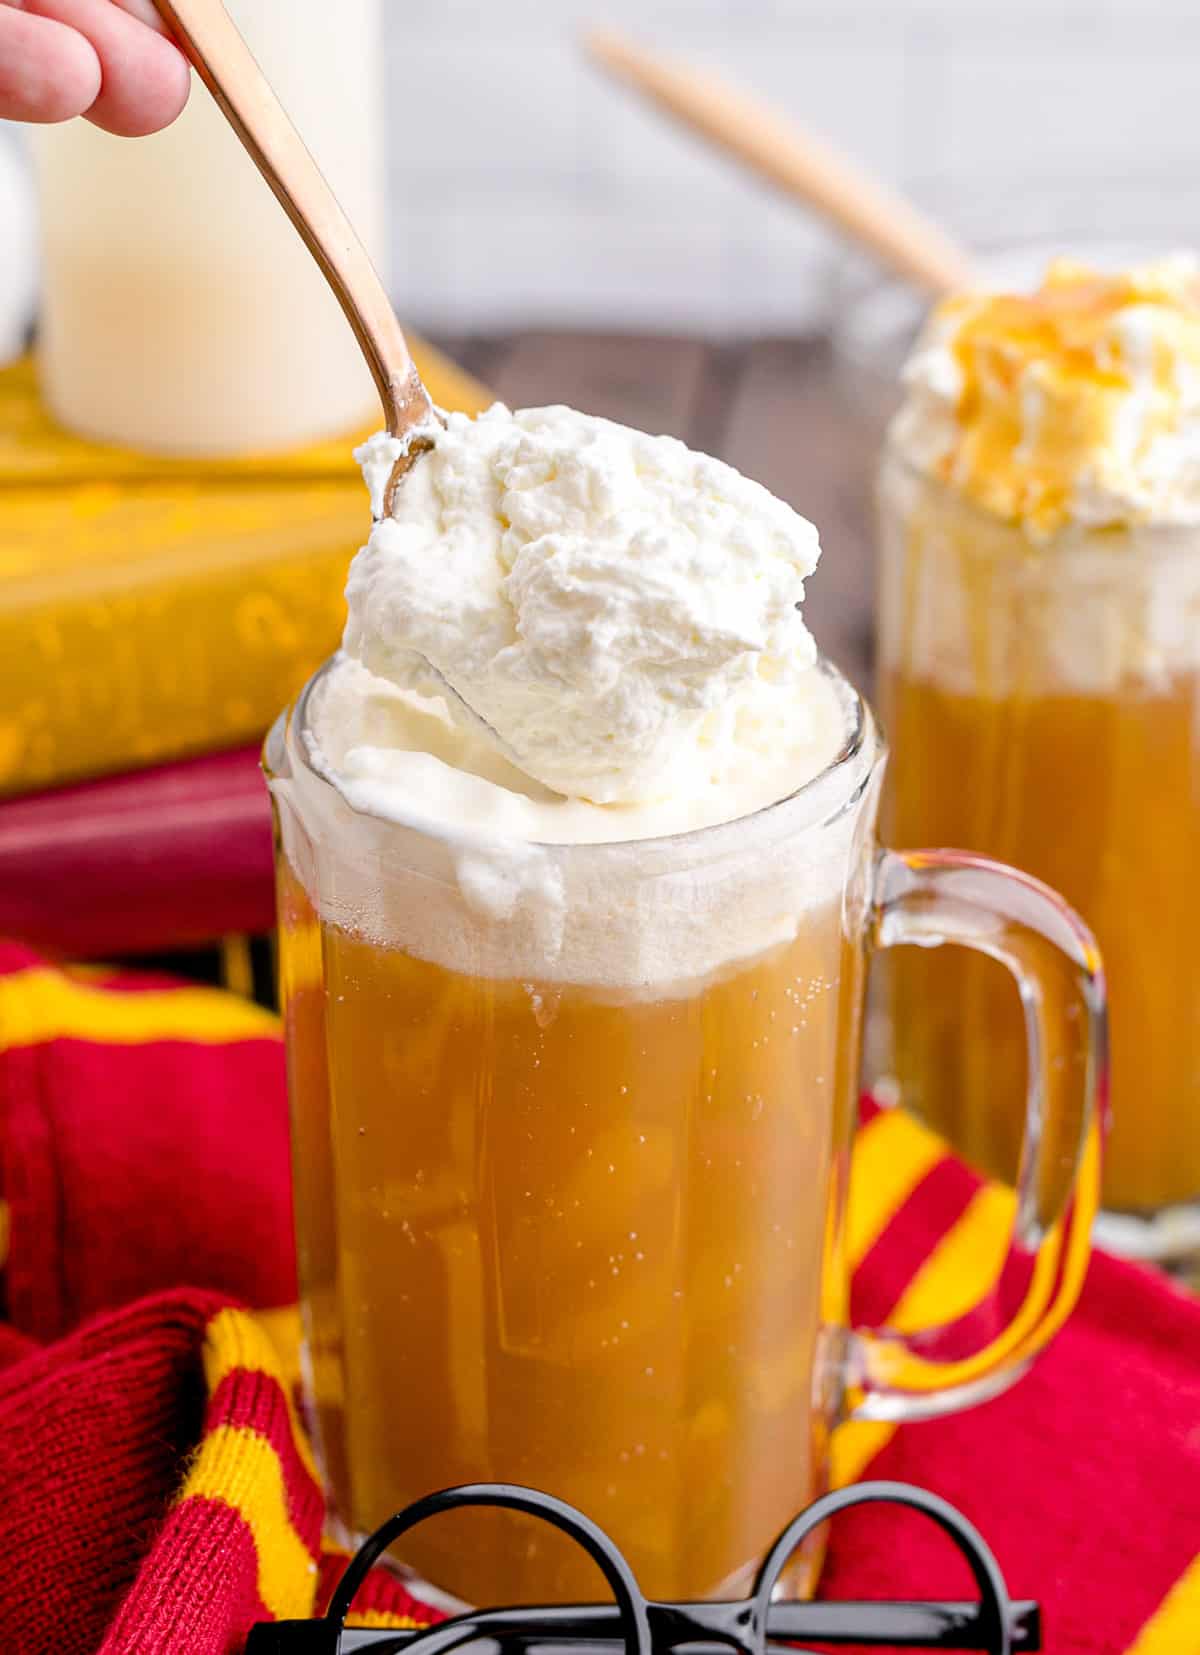 Spooning homemade whipped cream onto a mug full of Harry Potter copycat butterbeer.